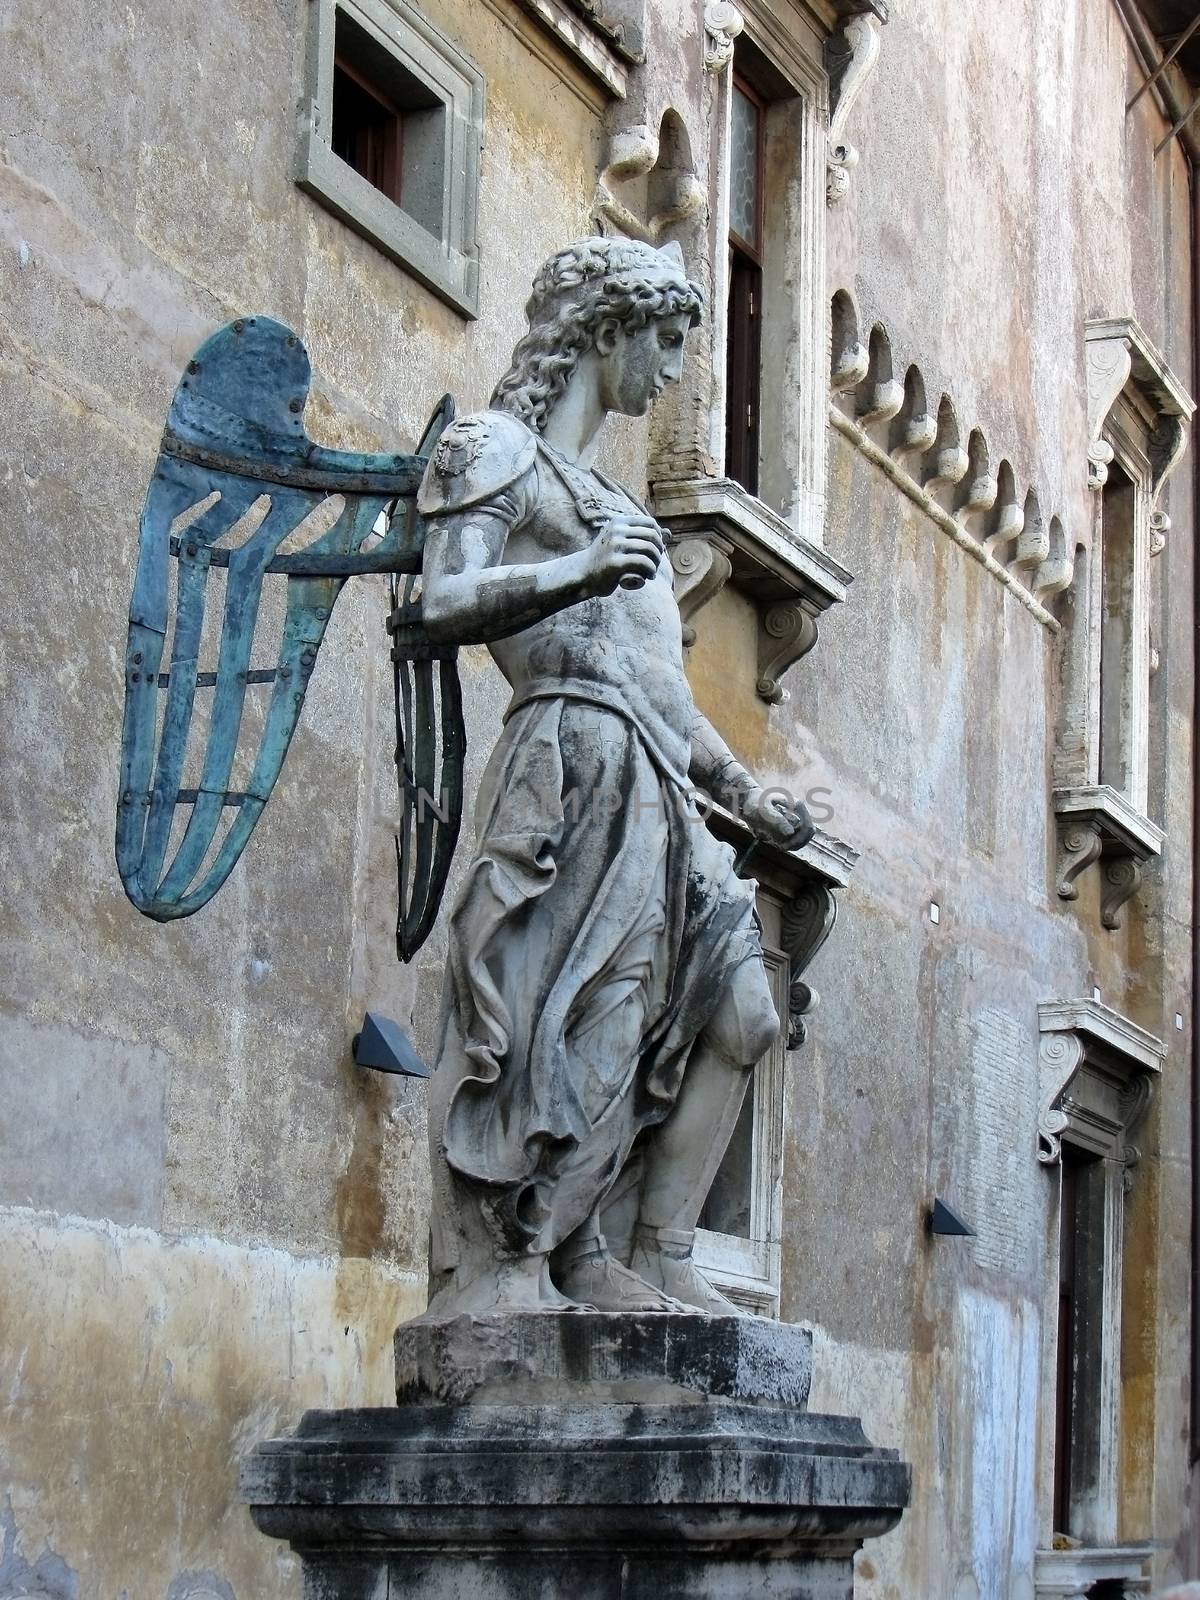 Castel Sant'Angelo, Rome, the statue of St. Michael the Archangel in the courtyard. A beautiful statue of an angel made of copper and stone.